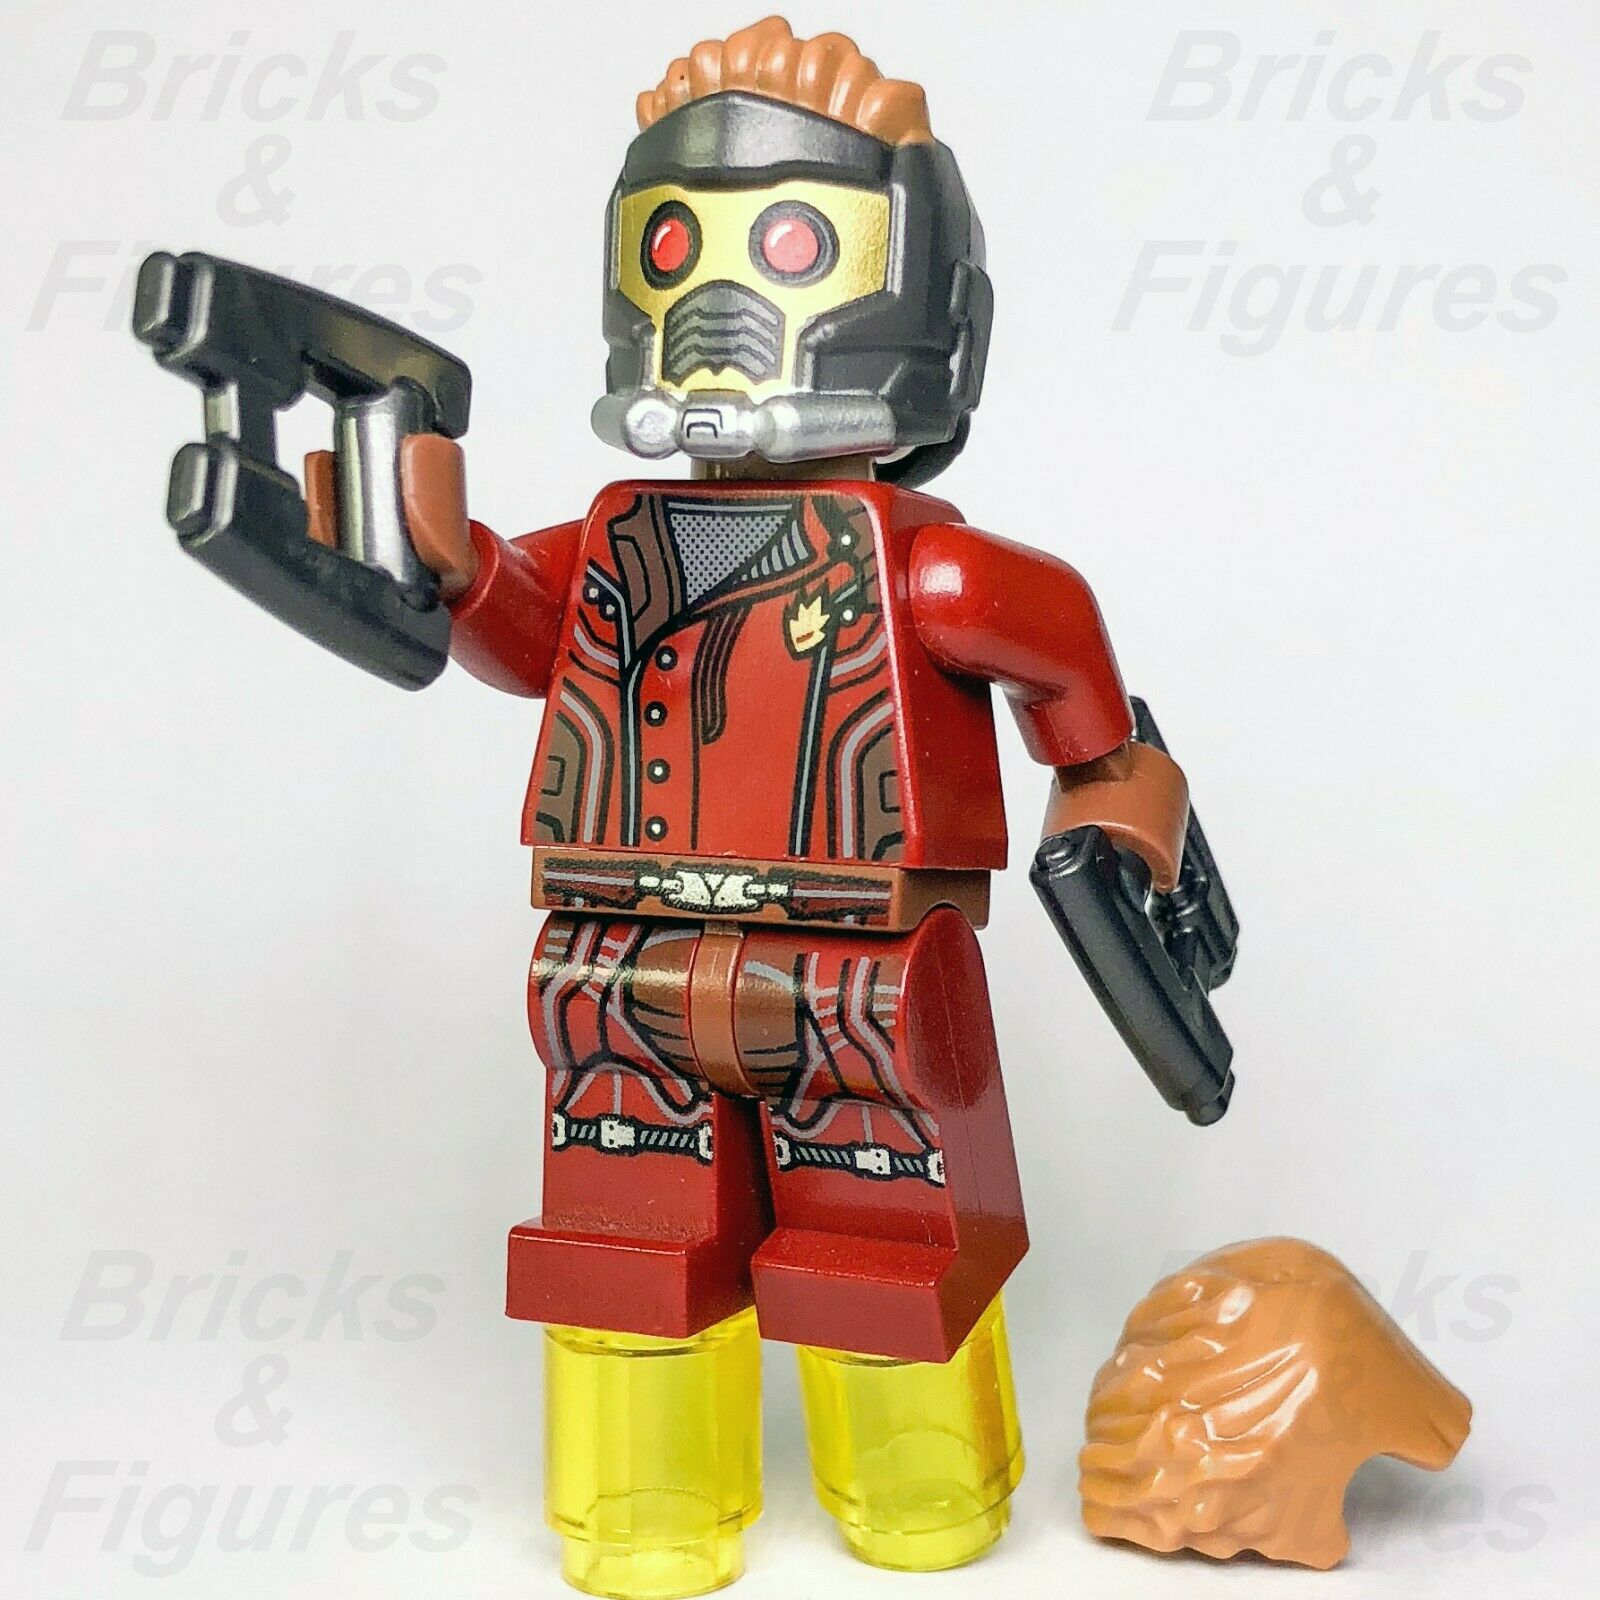 Marvel Super Heroes LEGO Star-Lord Guardians of the Galaxy Minifigure 76021 - Bricks & Figures